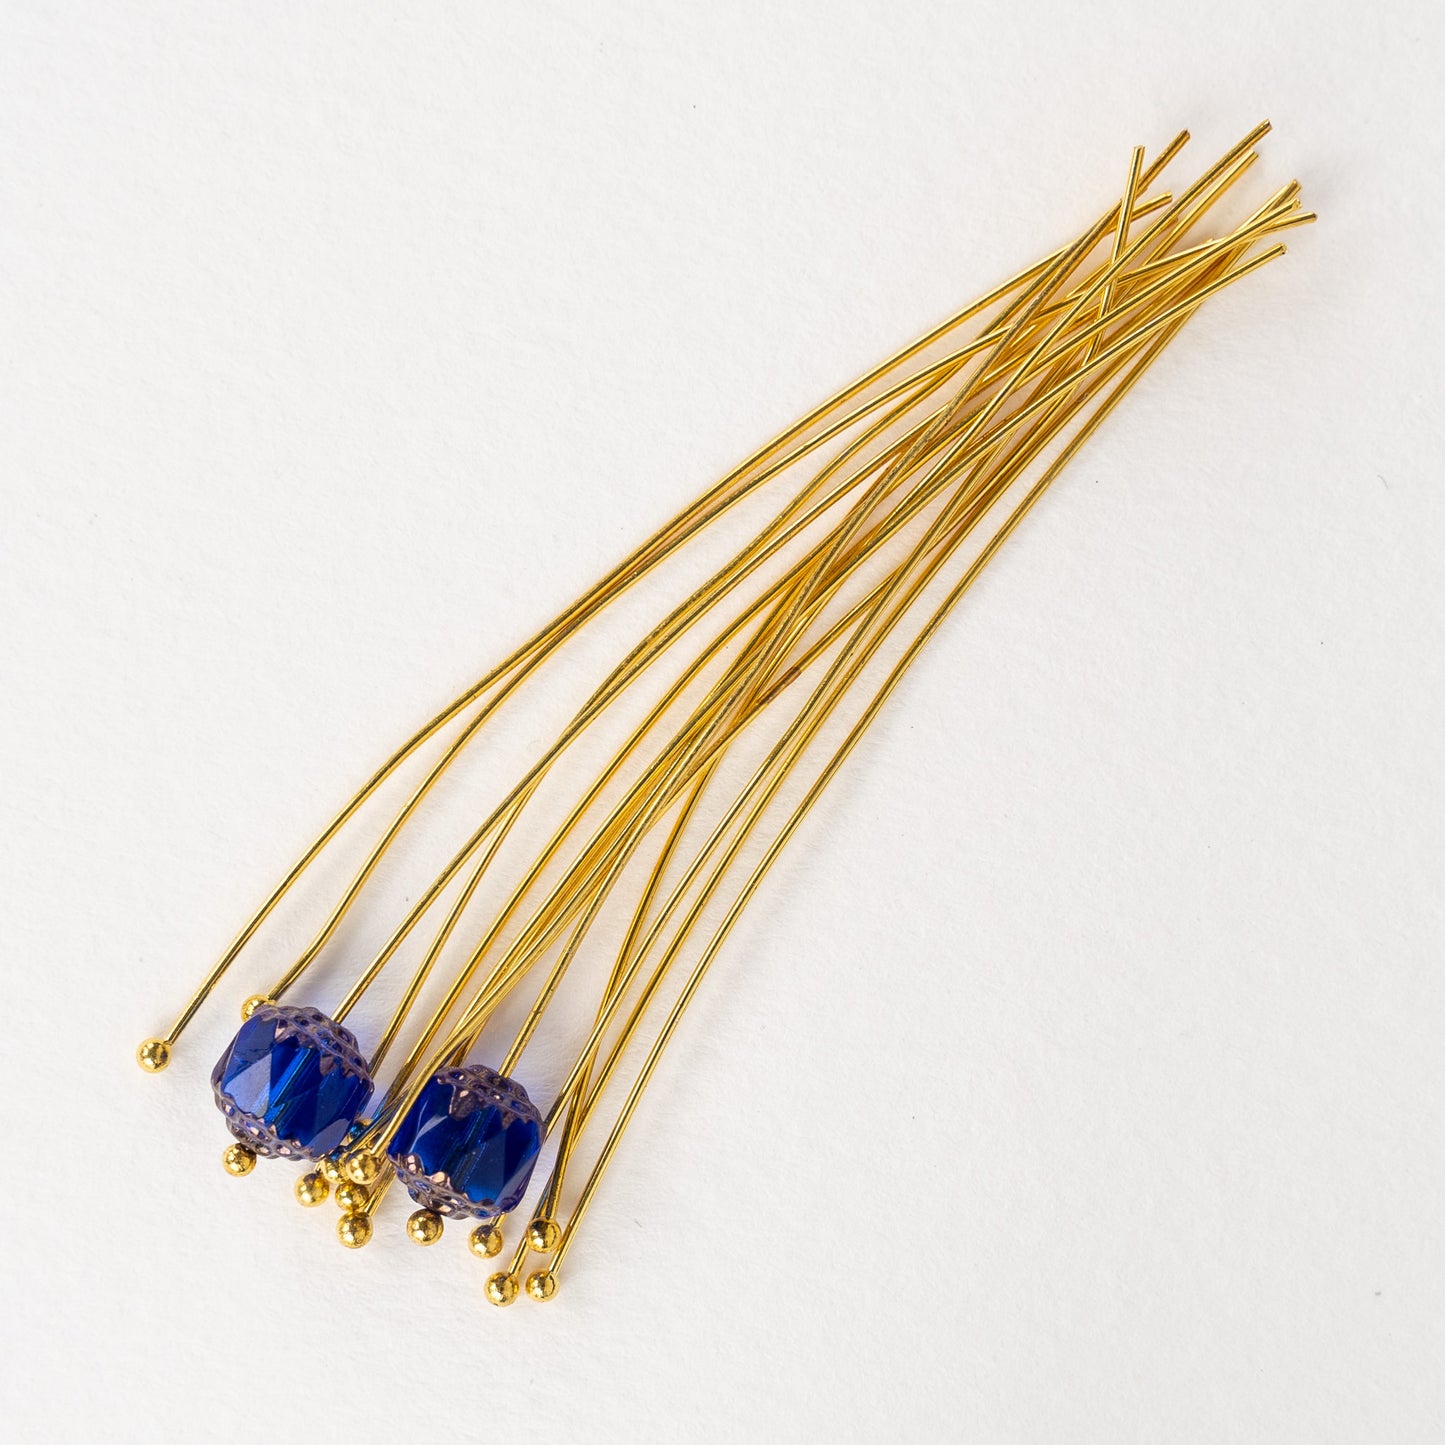 21g Gold Plated Balled Headpins - 3 inch - 50 or 200 pieces